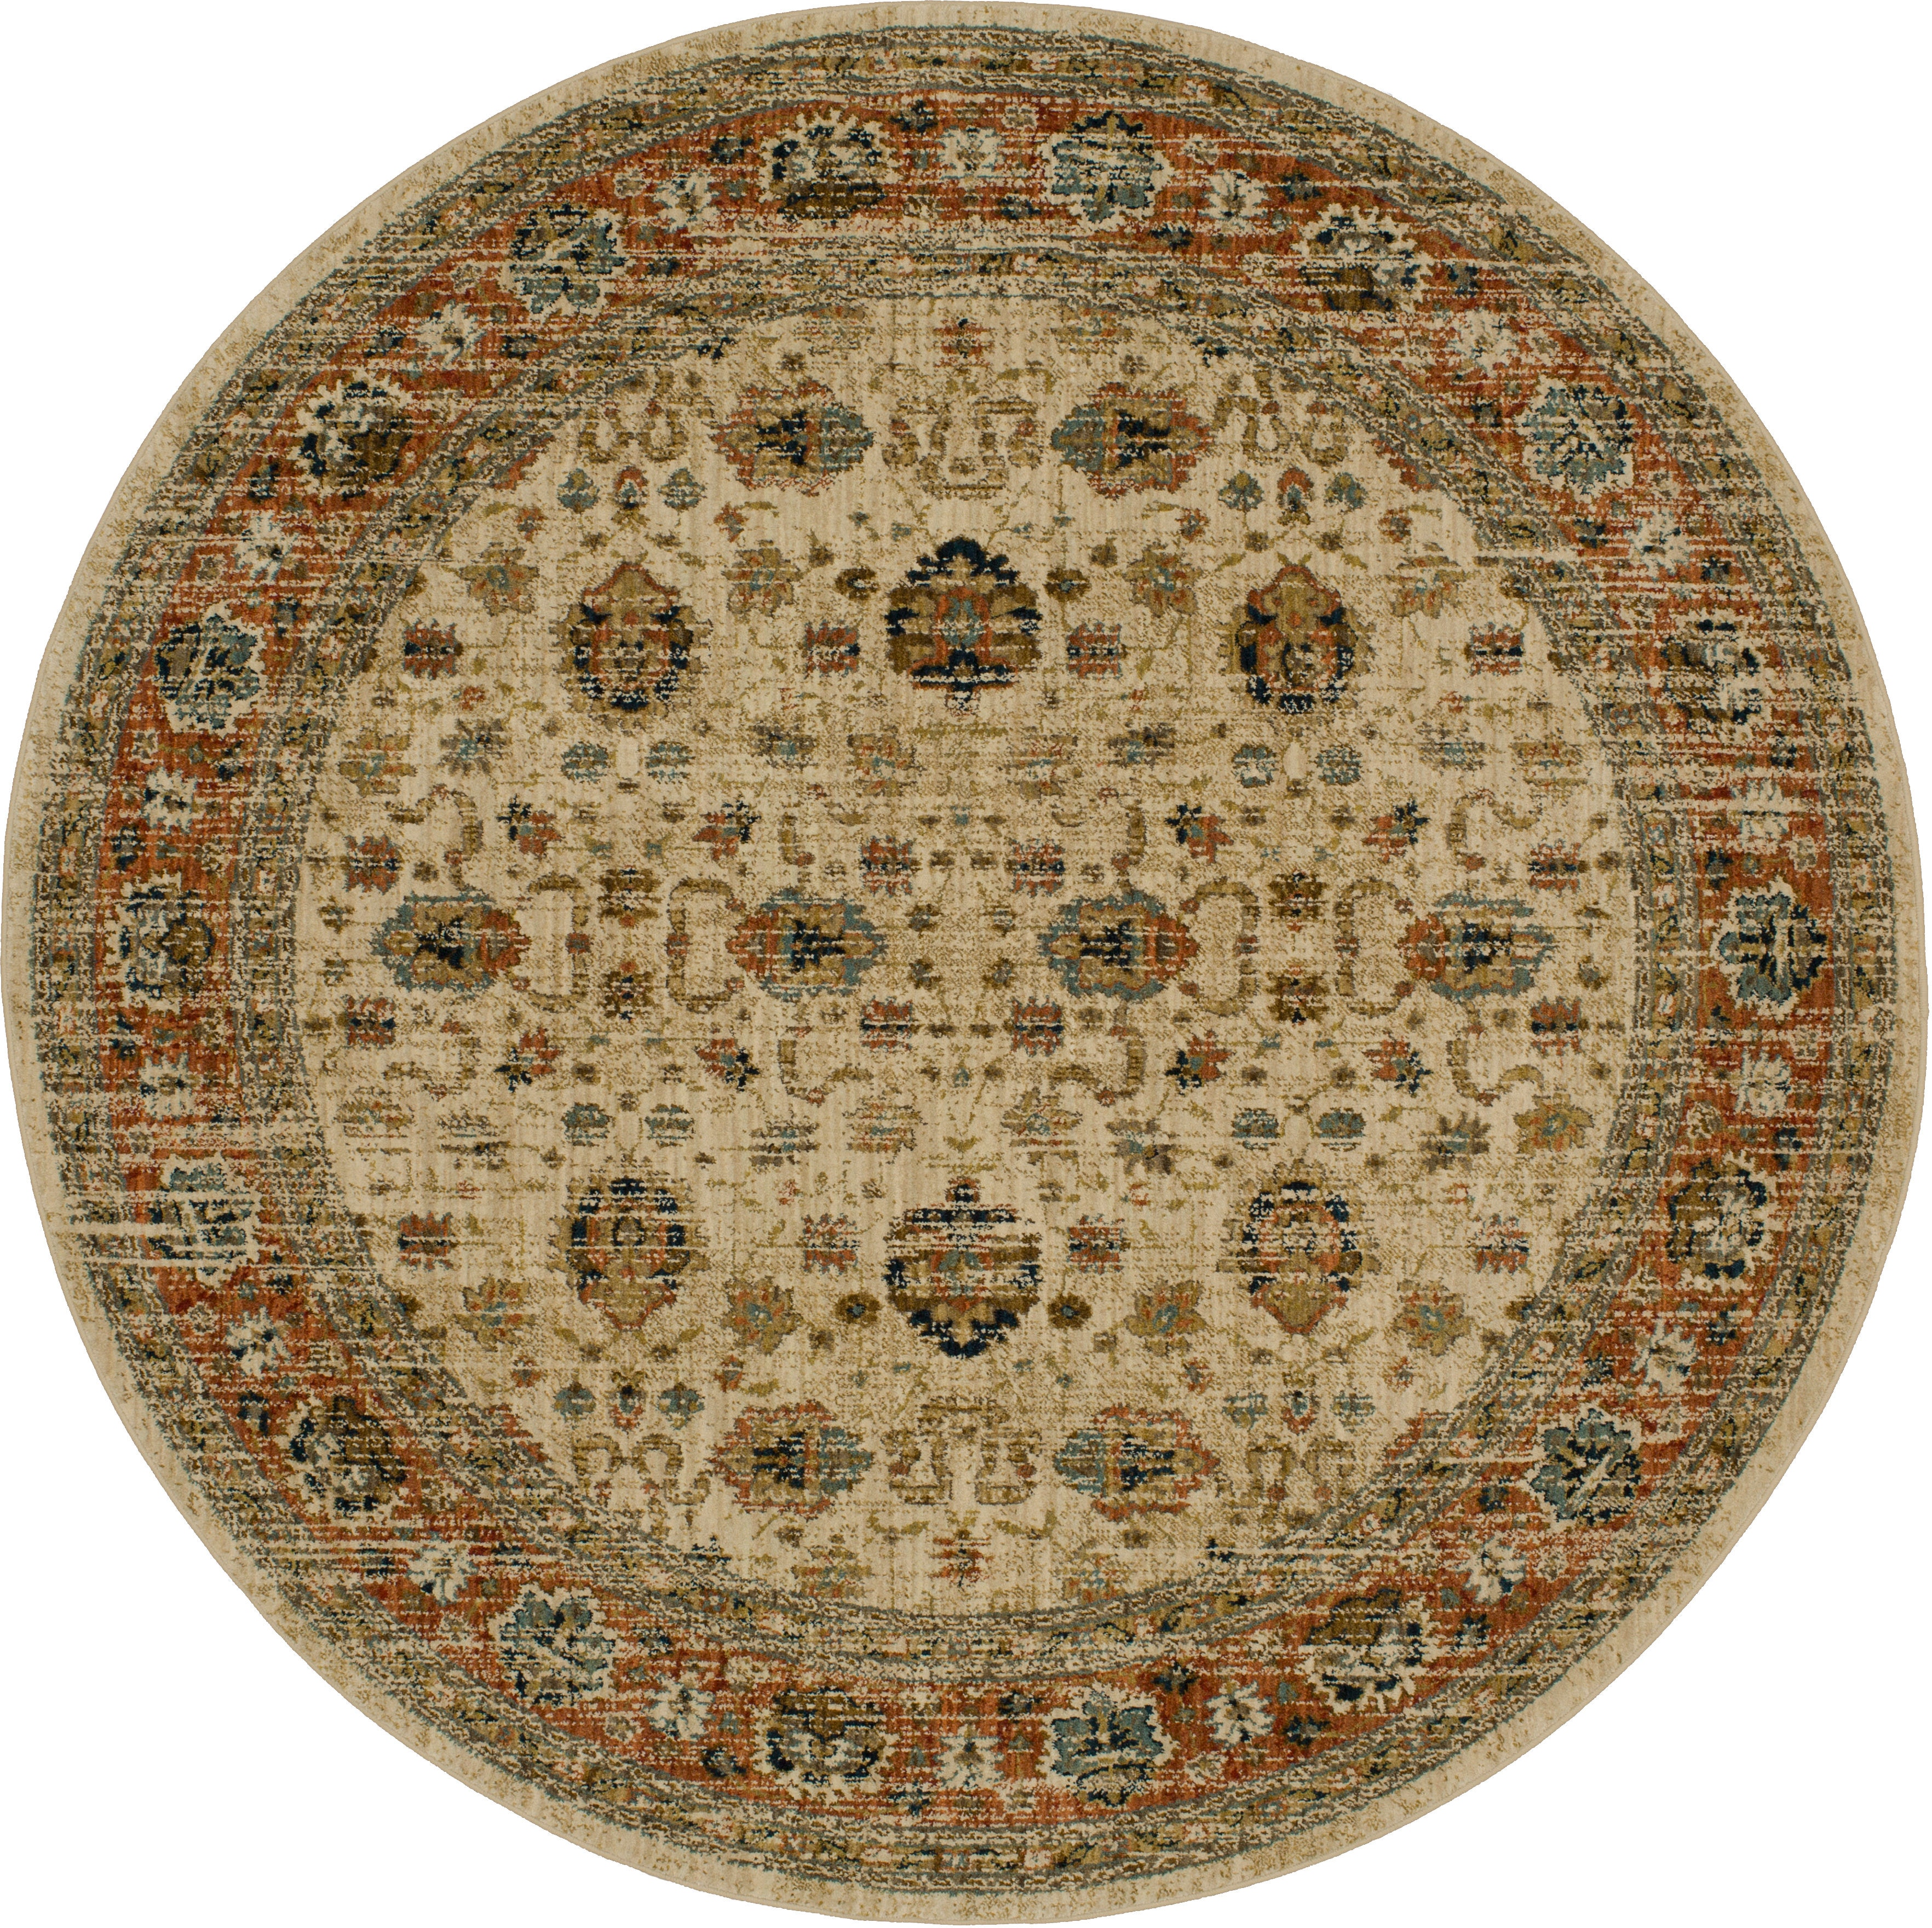 New Persian Rug 5x5 Feet Circle Shape Carpet Ivory Round Rugs - Household  Items, Facebook Marketplace